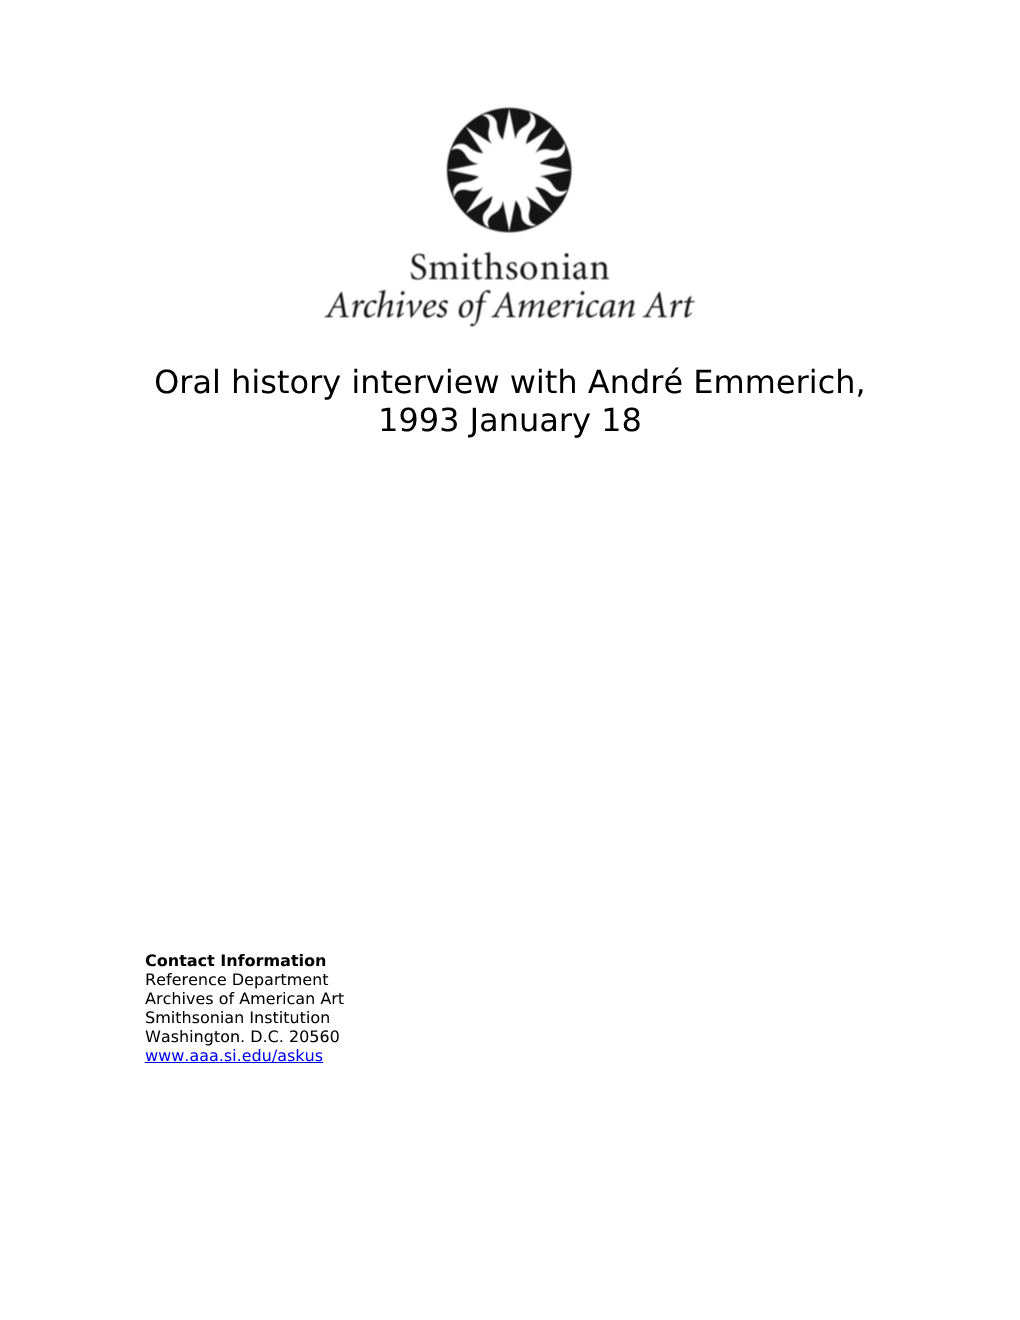 Oral History Interview with André Emmerich, 1993 January 18